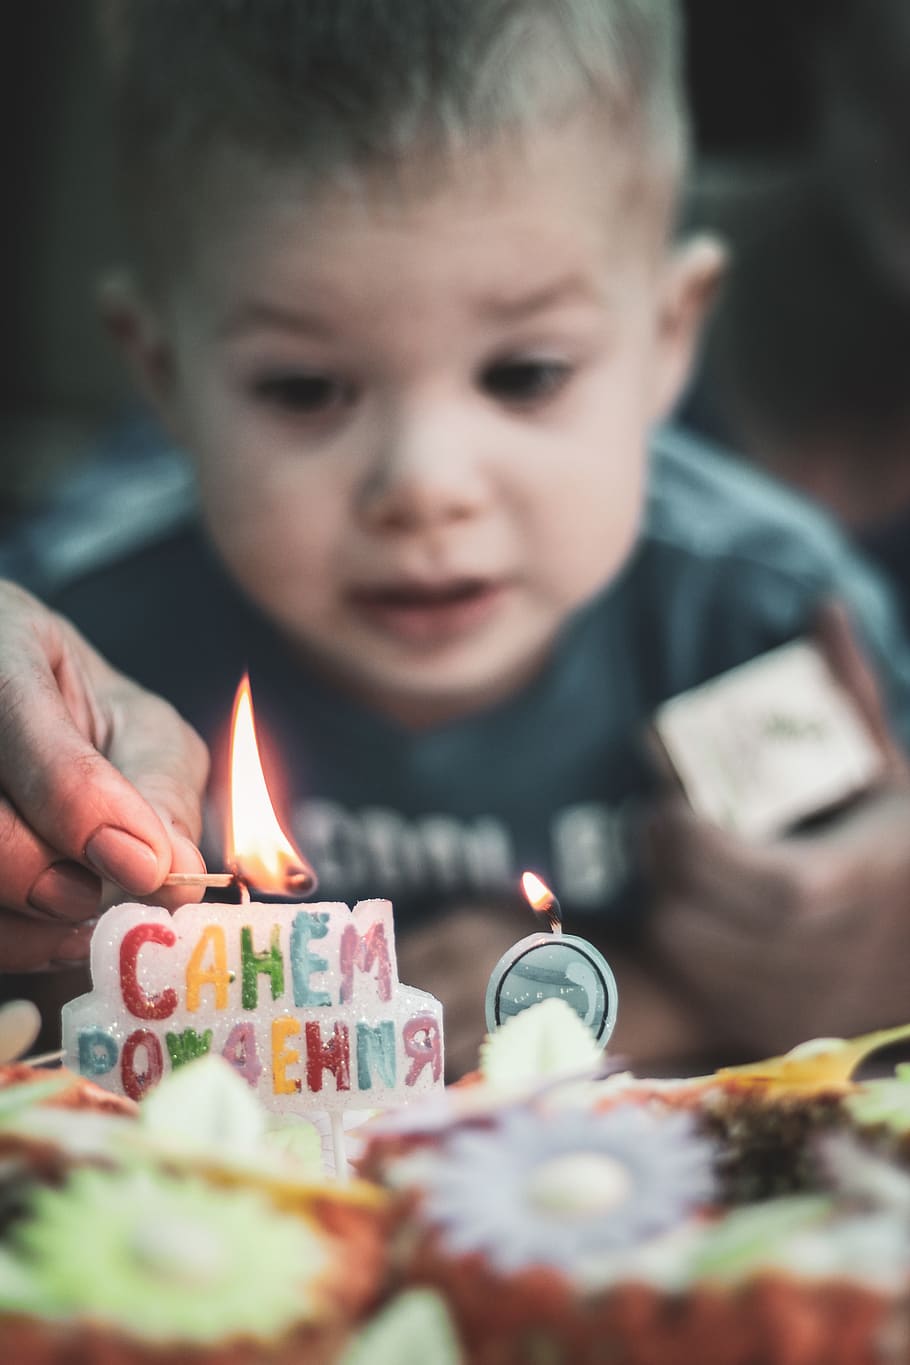 HD wallpaper: boy about to blow birthday candle, human, person, dessert,  cake | Wallpaper Flare